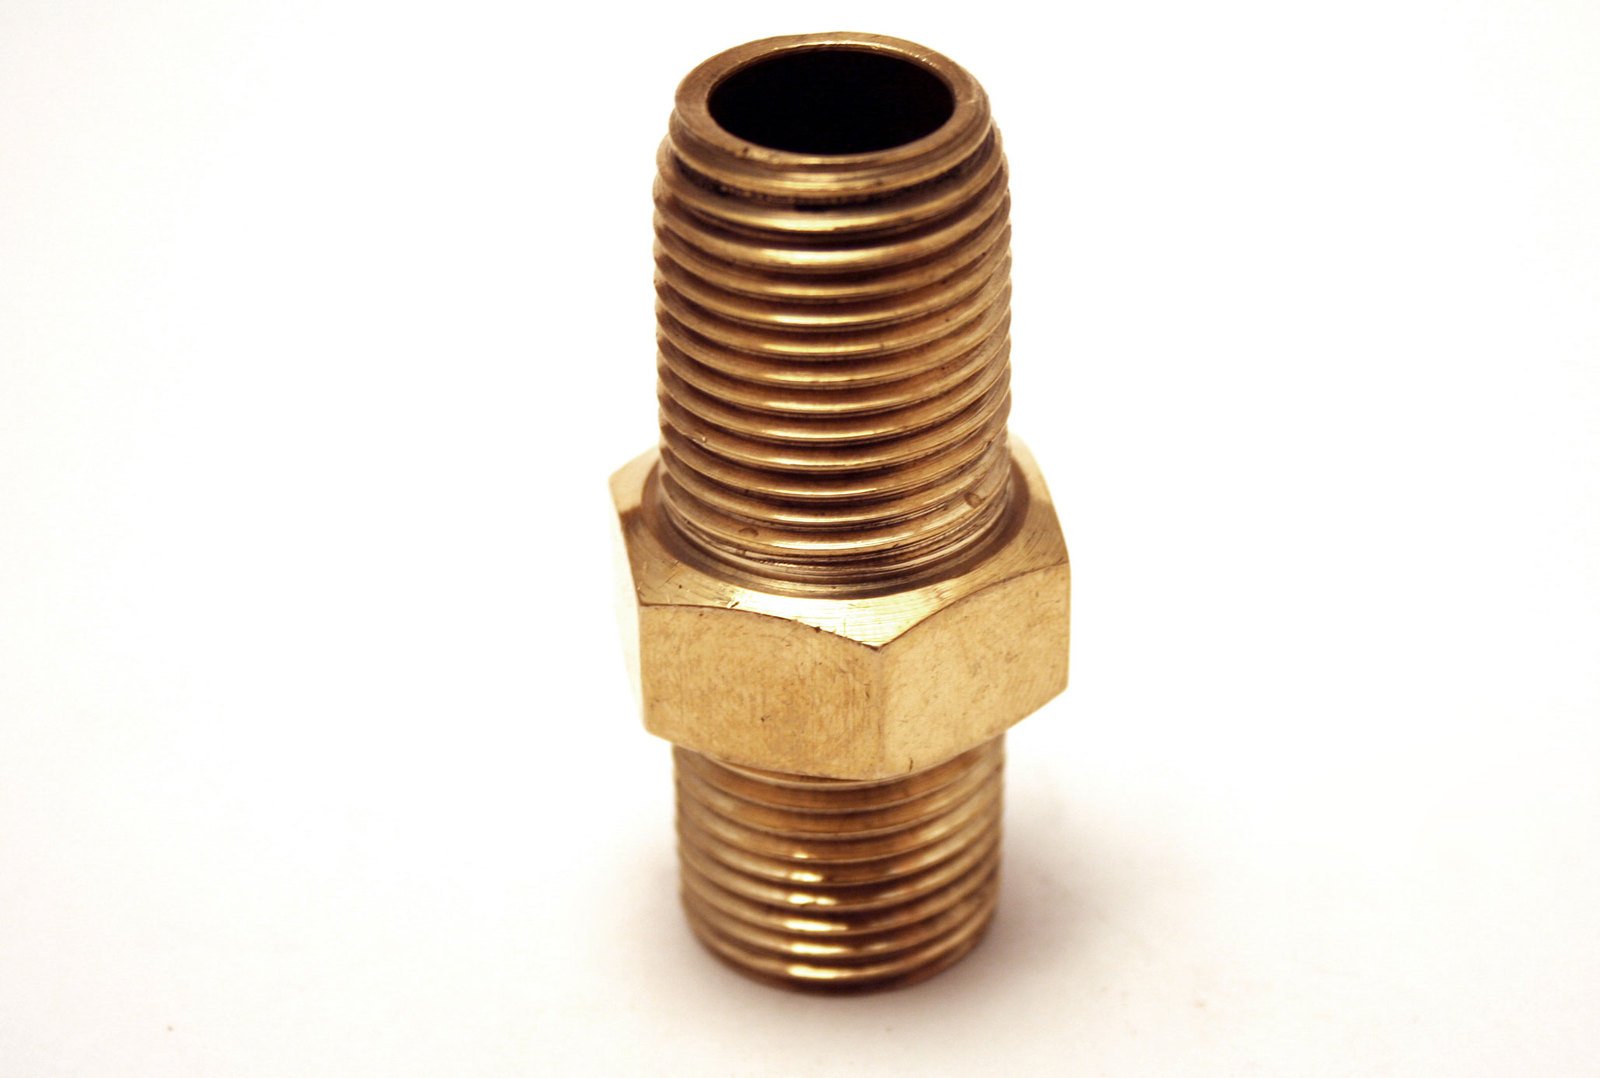 ss threaded fittings are the best way to improve your plumbing performance